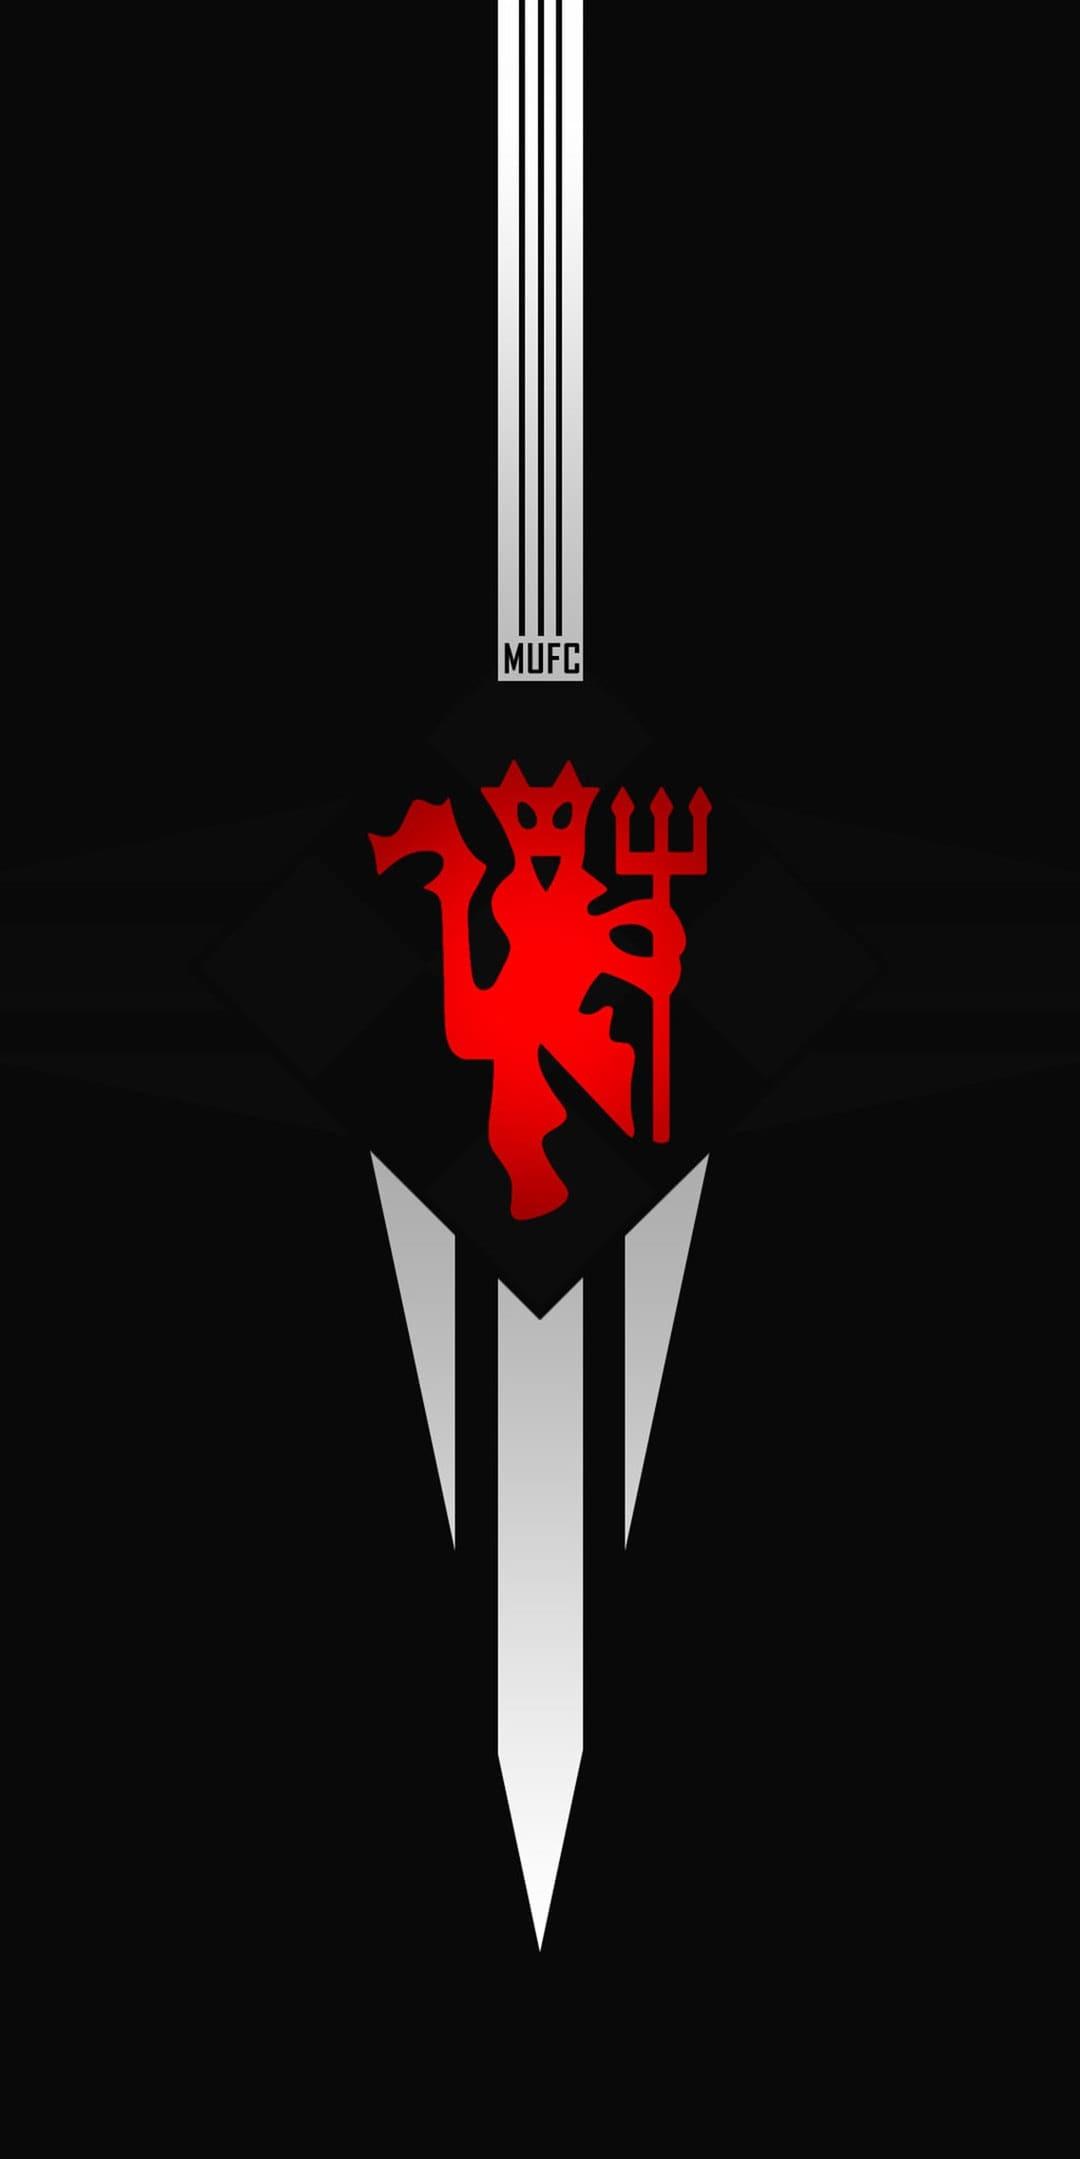 Wallpaper ID 372997 Sports Manchester United FC Phone